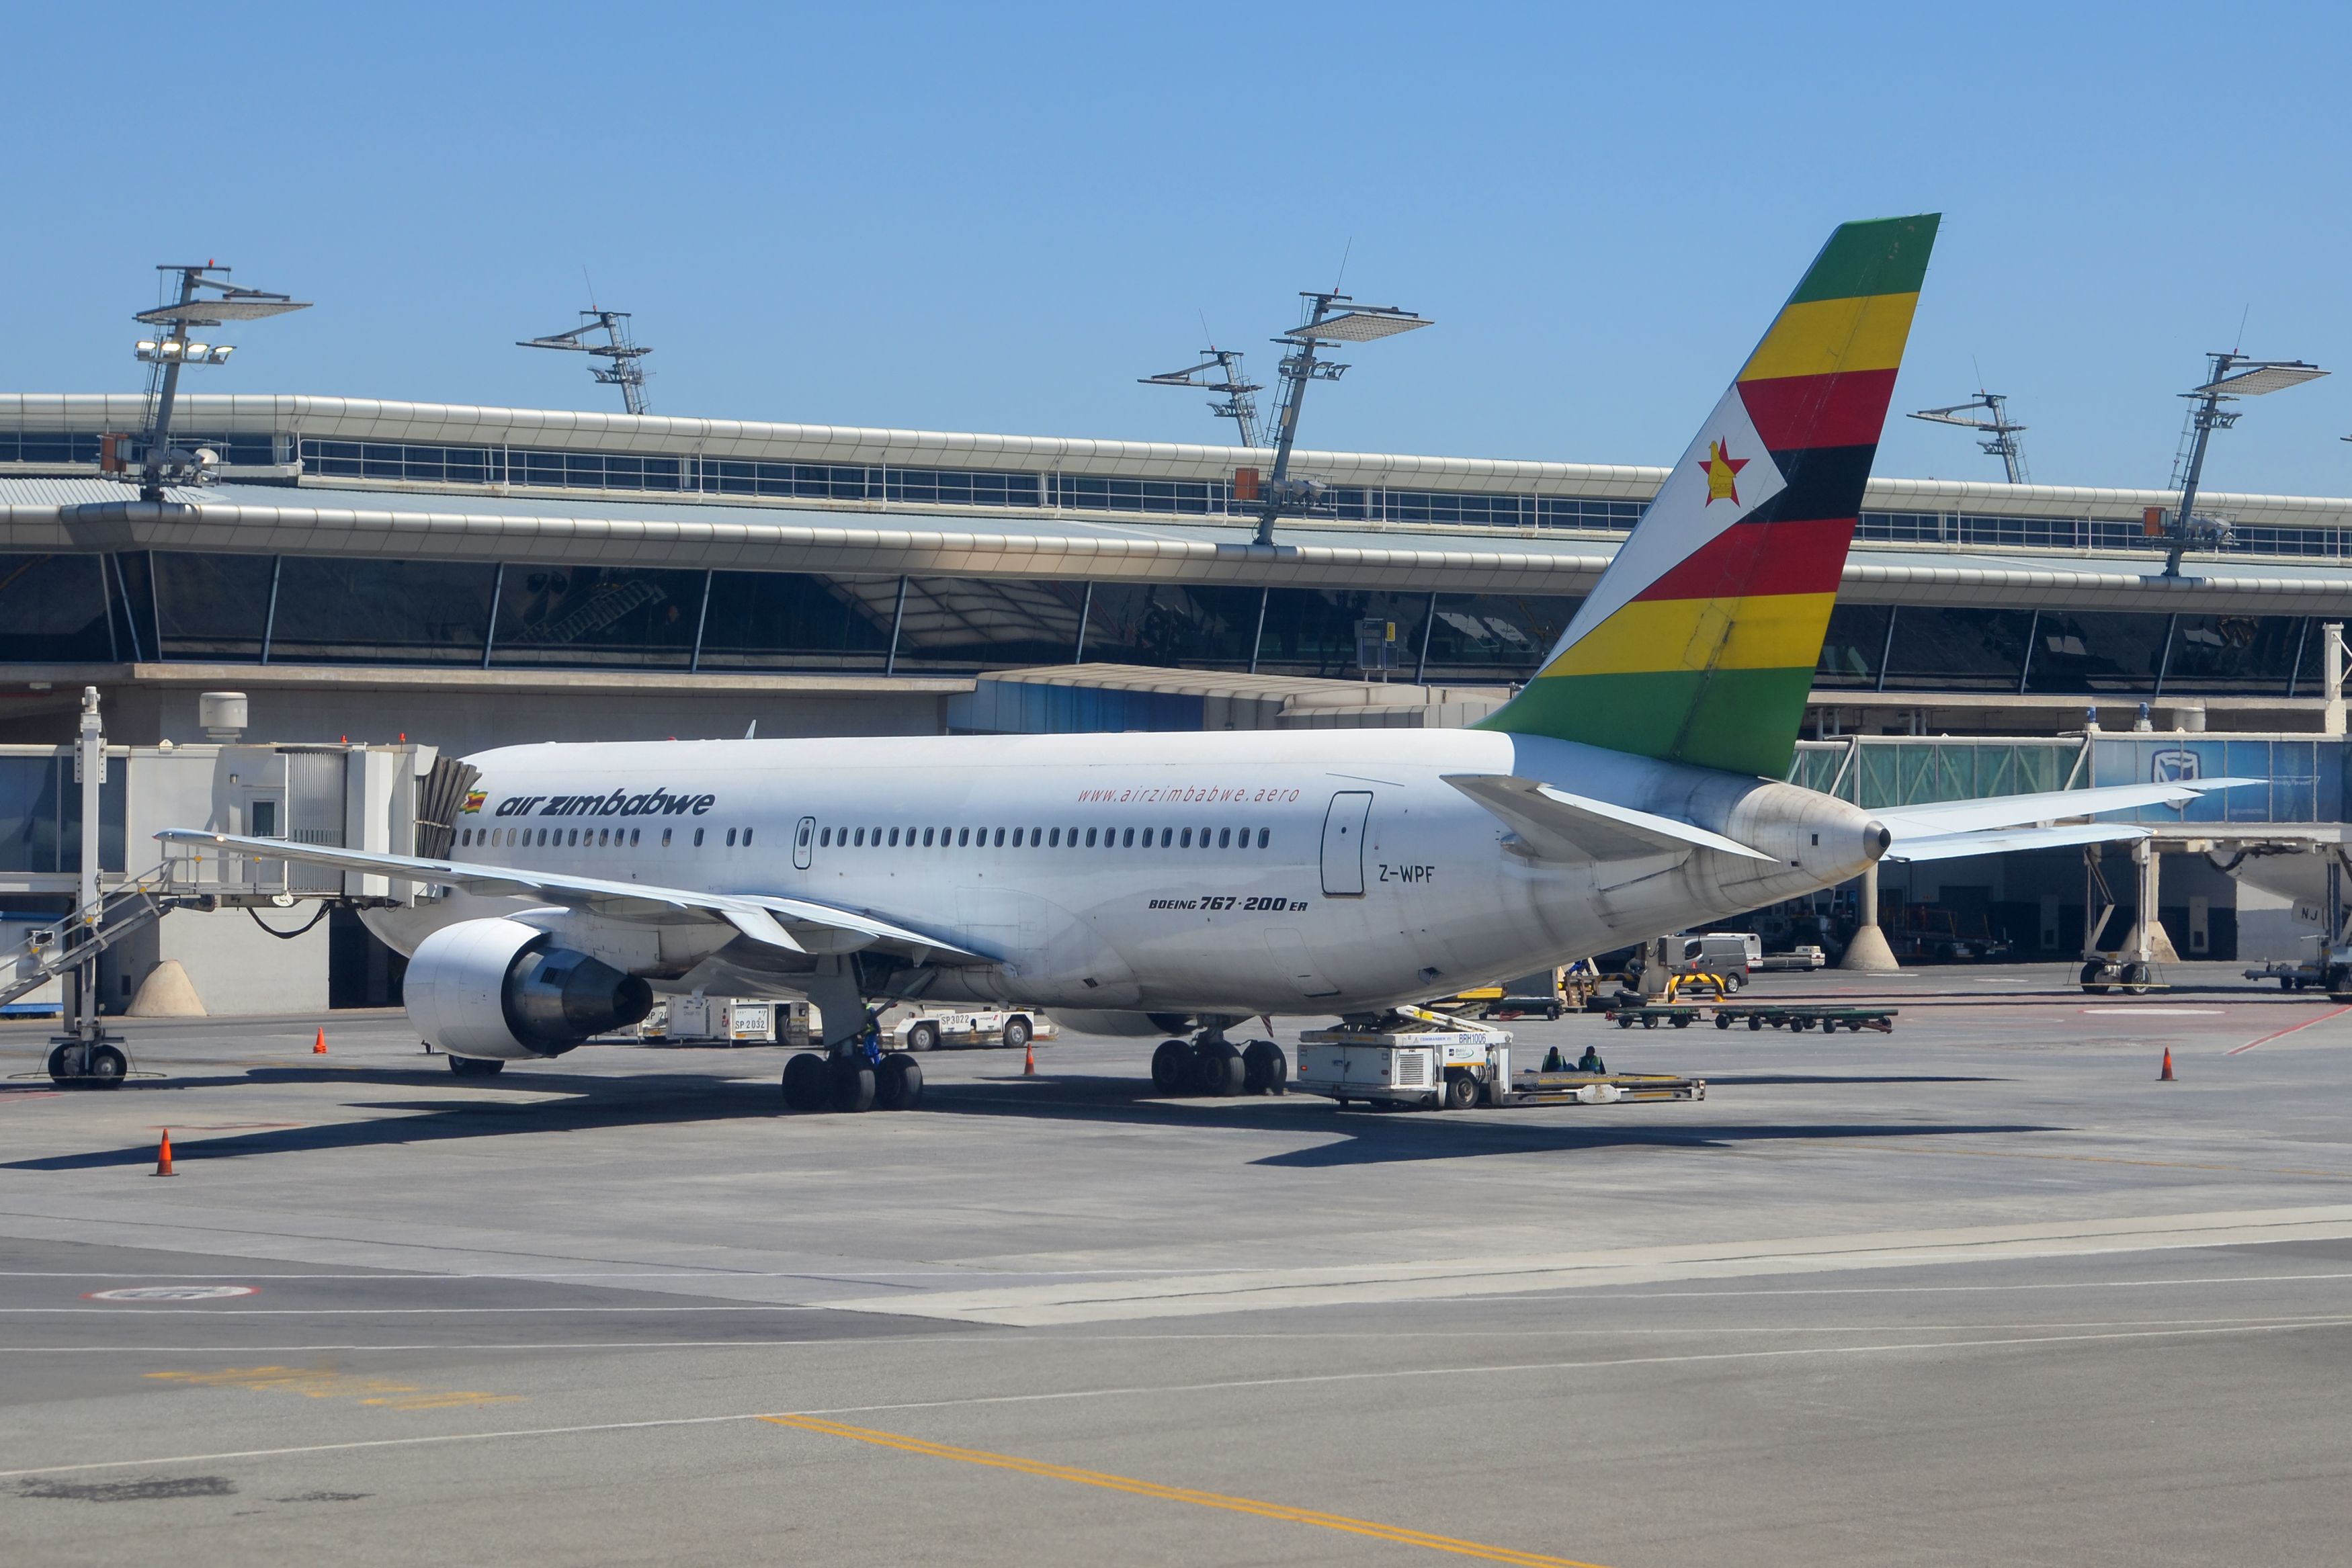 An Air Zimbabwe Boeing 767 parked on an airport apron at a gate.